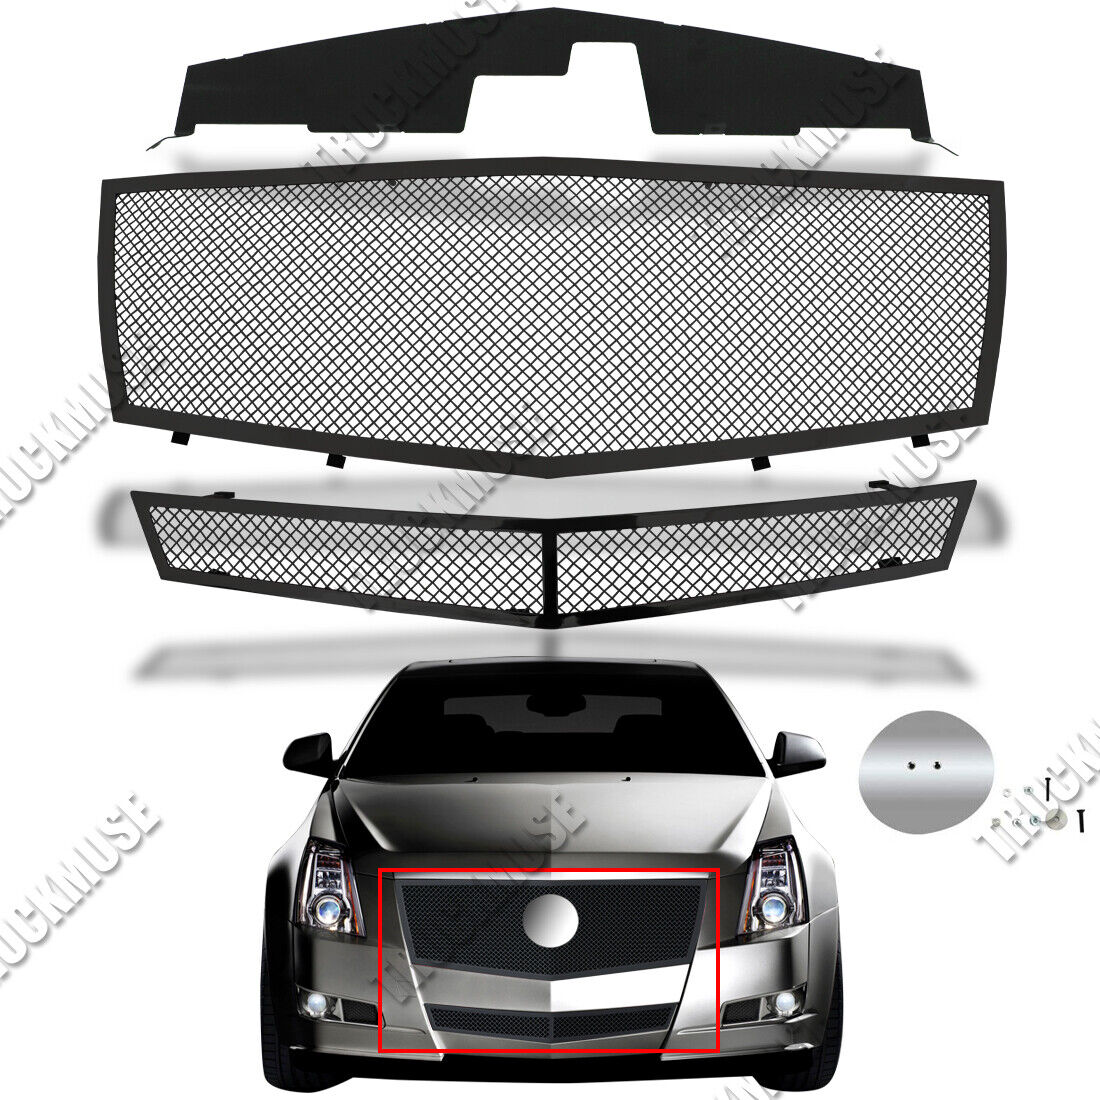 Fits 2008-2013 Cadillac CTS Stainless Steel Mesh Grille Front Grill Insert 09 10